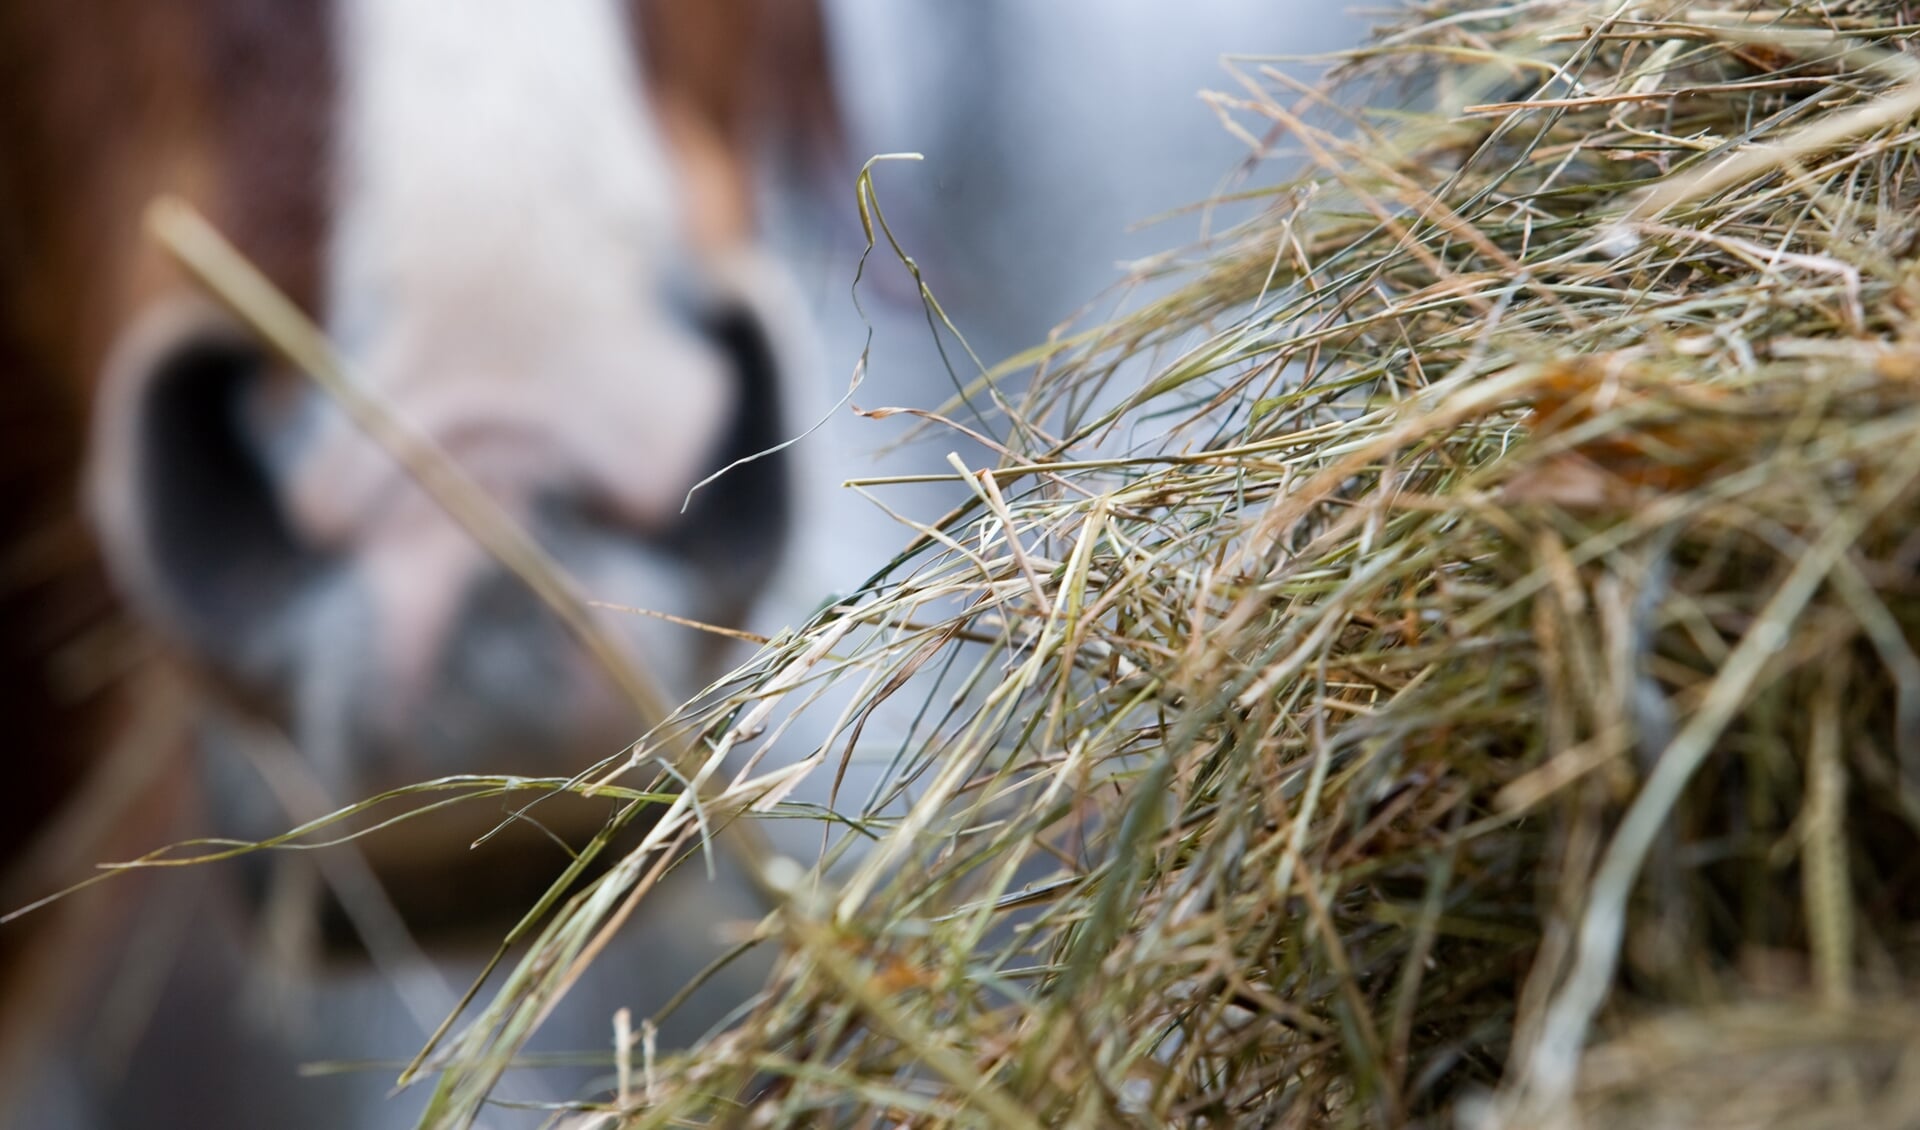 horse muzzle in background  with hay in the foreground